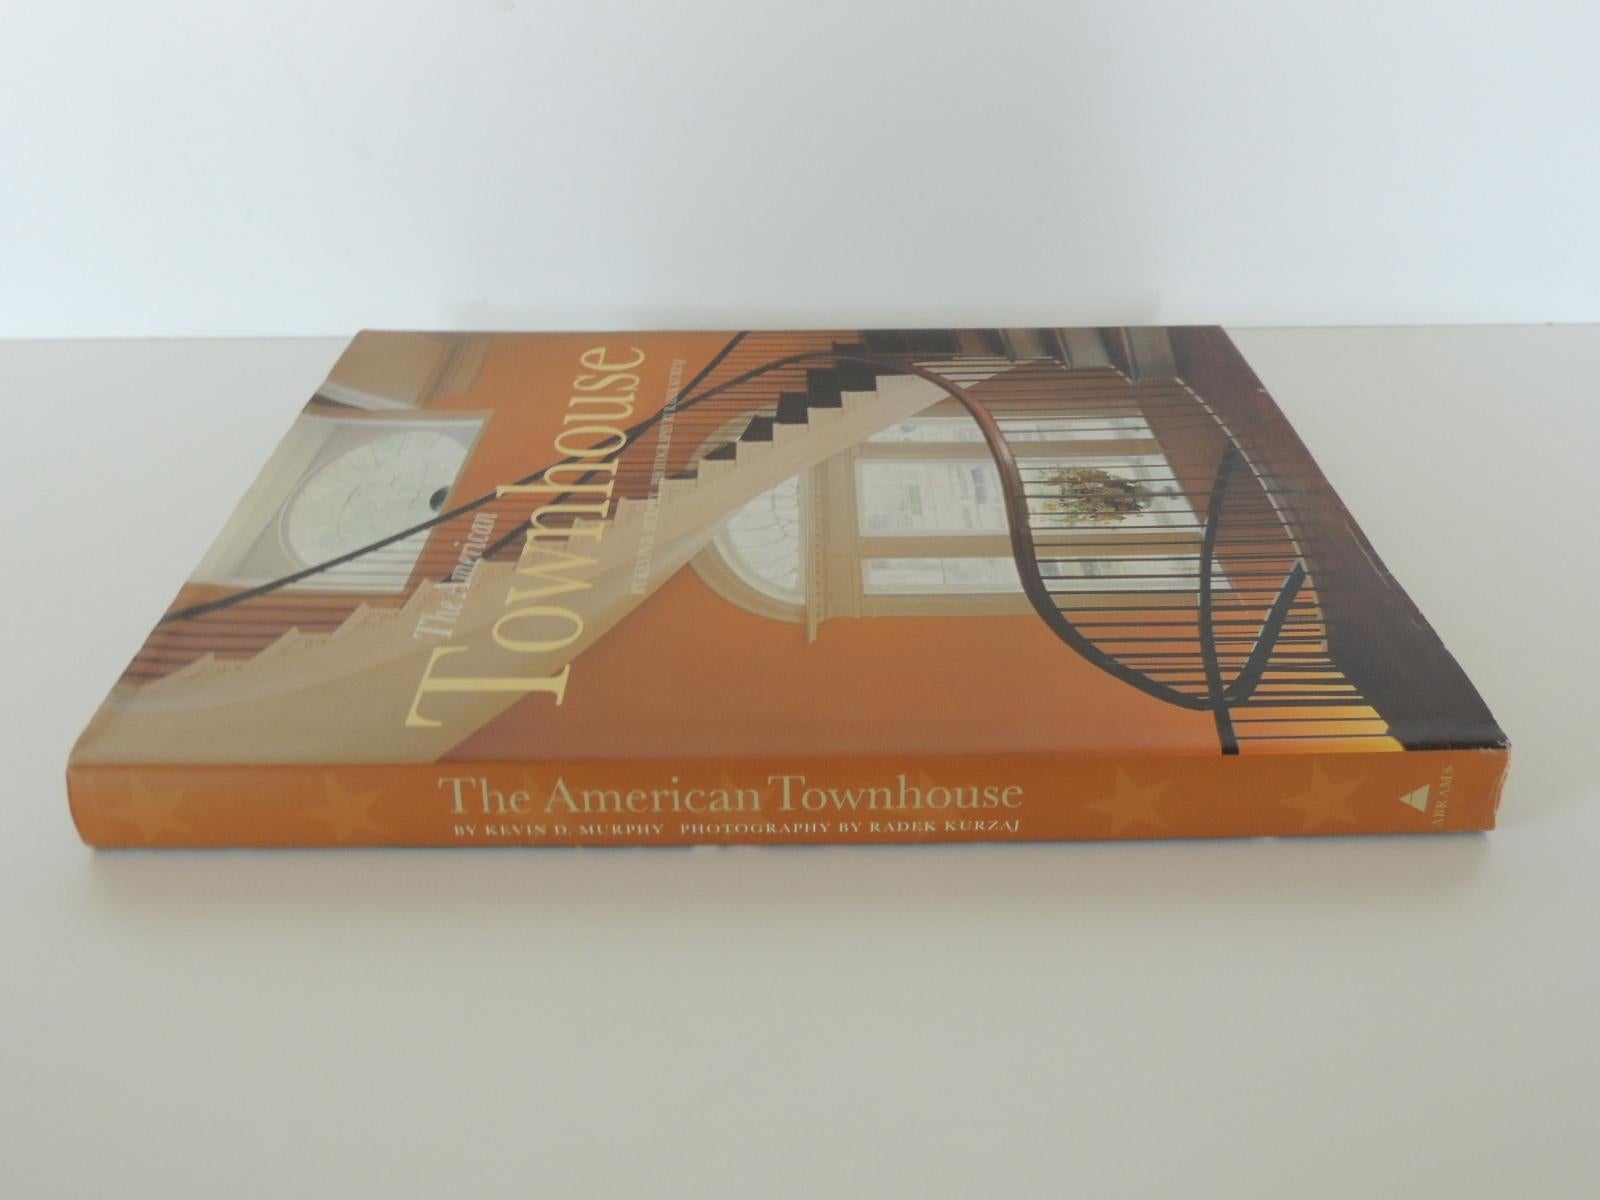 The American Townhouse Decorative hard-cover vintage book, by Kevin D. Murphy, Abrams, New York, 2005.
The American townhouse is one of the most popular house types in urban America. This comprehensive volume tours the reader through 25 stunning